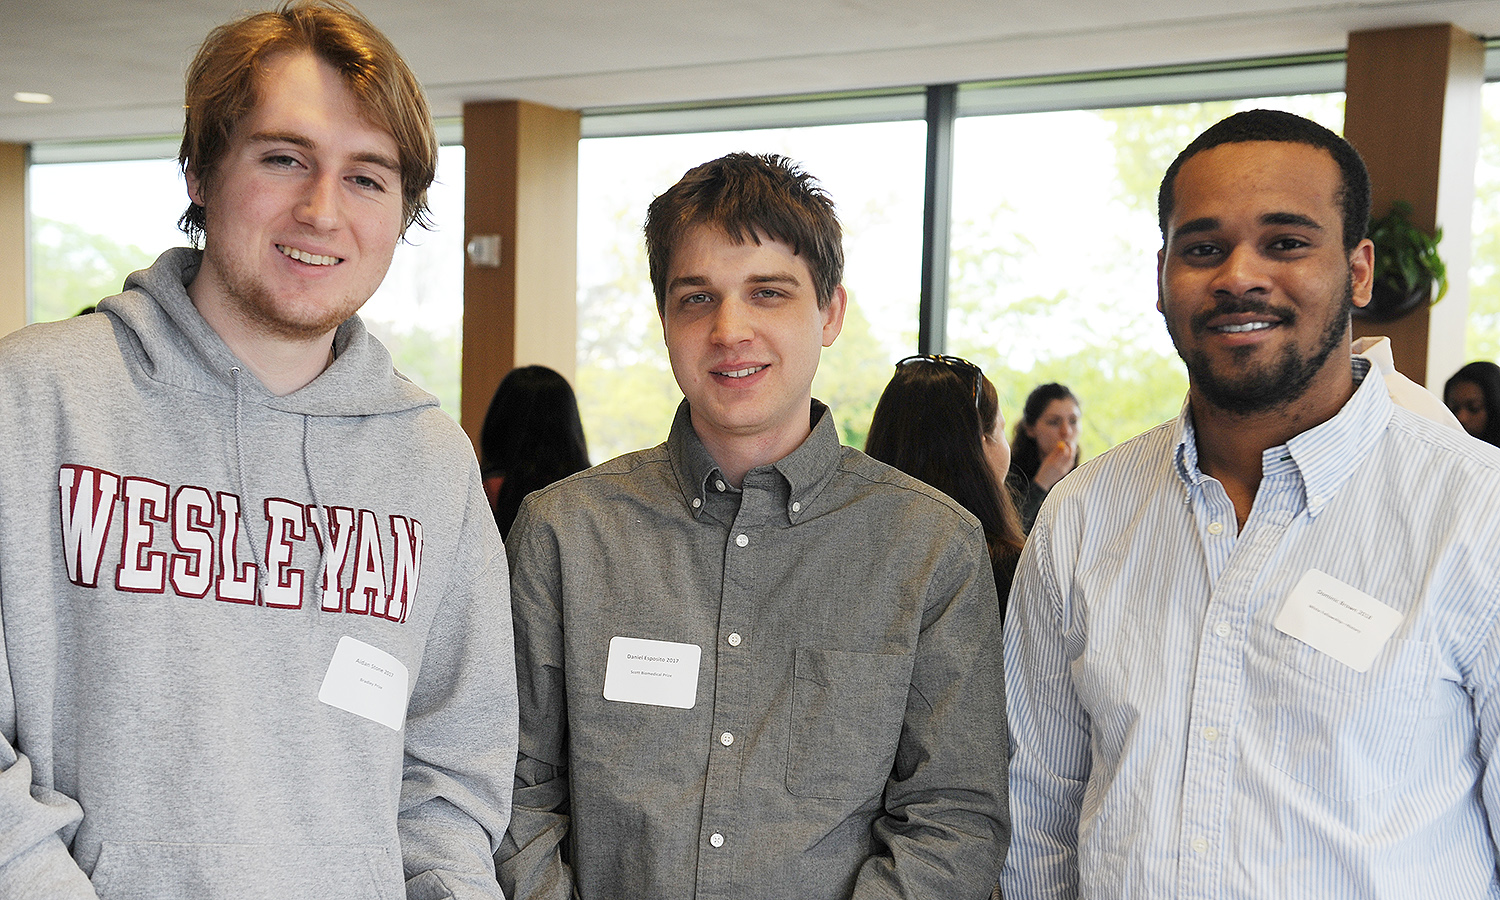 Aidan Stone ’17 received the Bradley Prize for excellence in chemistry; Daniel Esposito ’17 received the Scott Biomedical Prize; and Dominic Brown ’18 received the White Fellowship for excellence in history. 